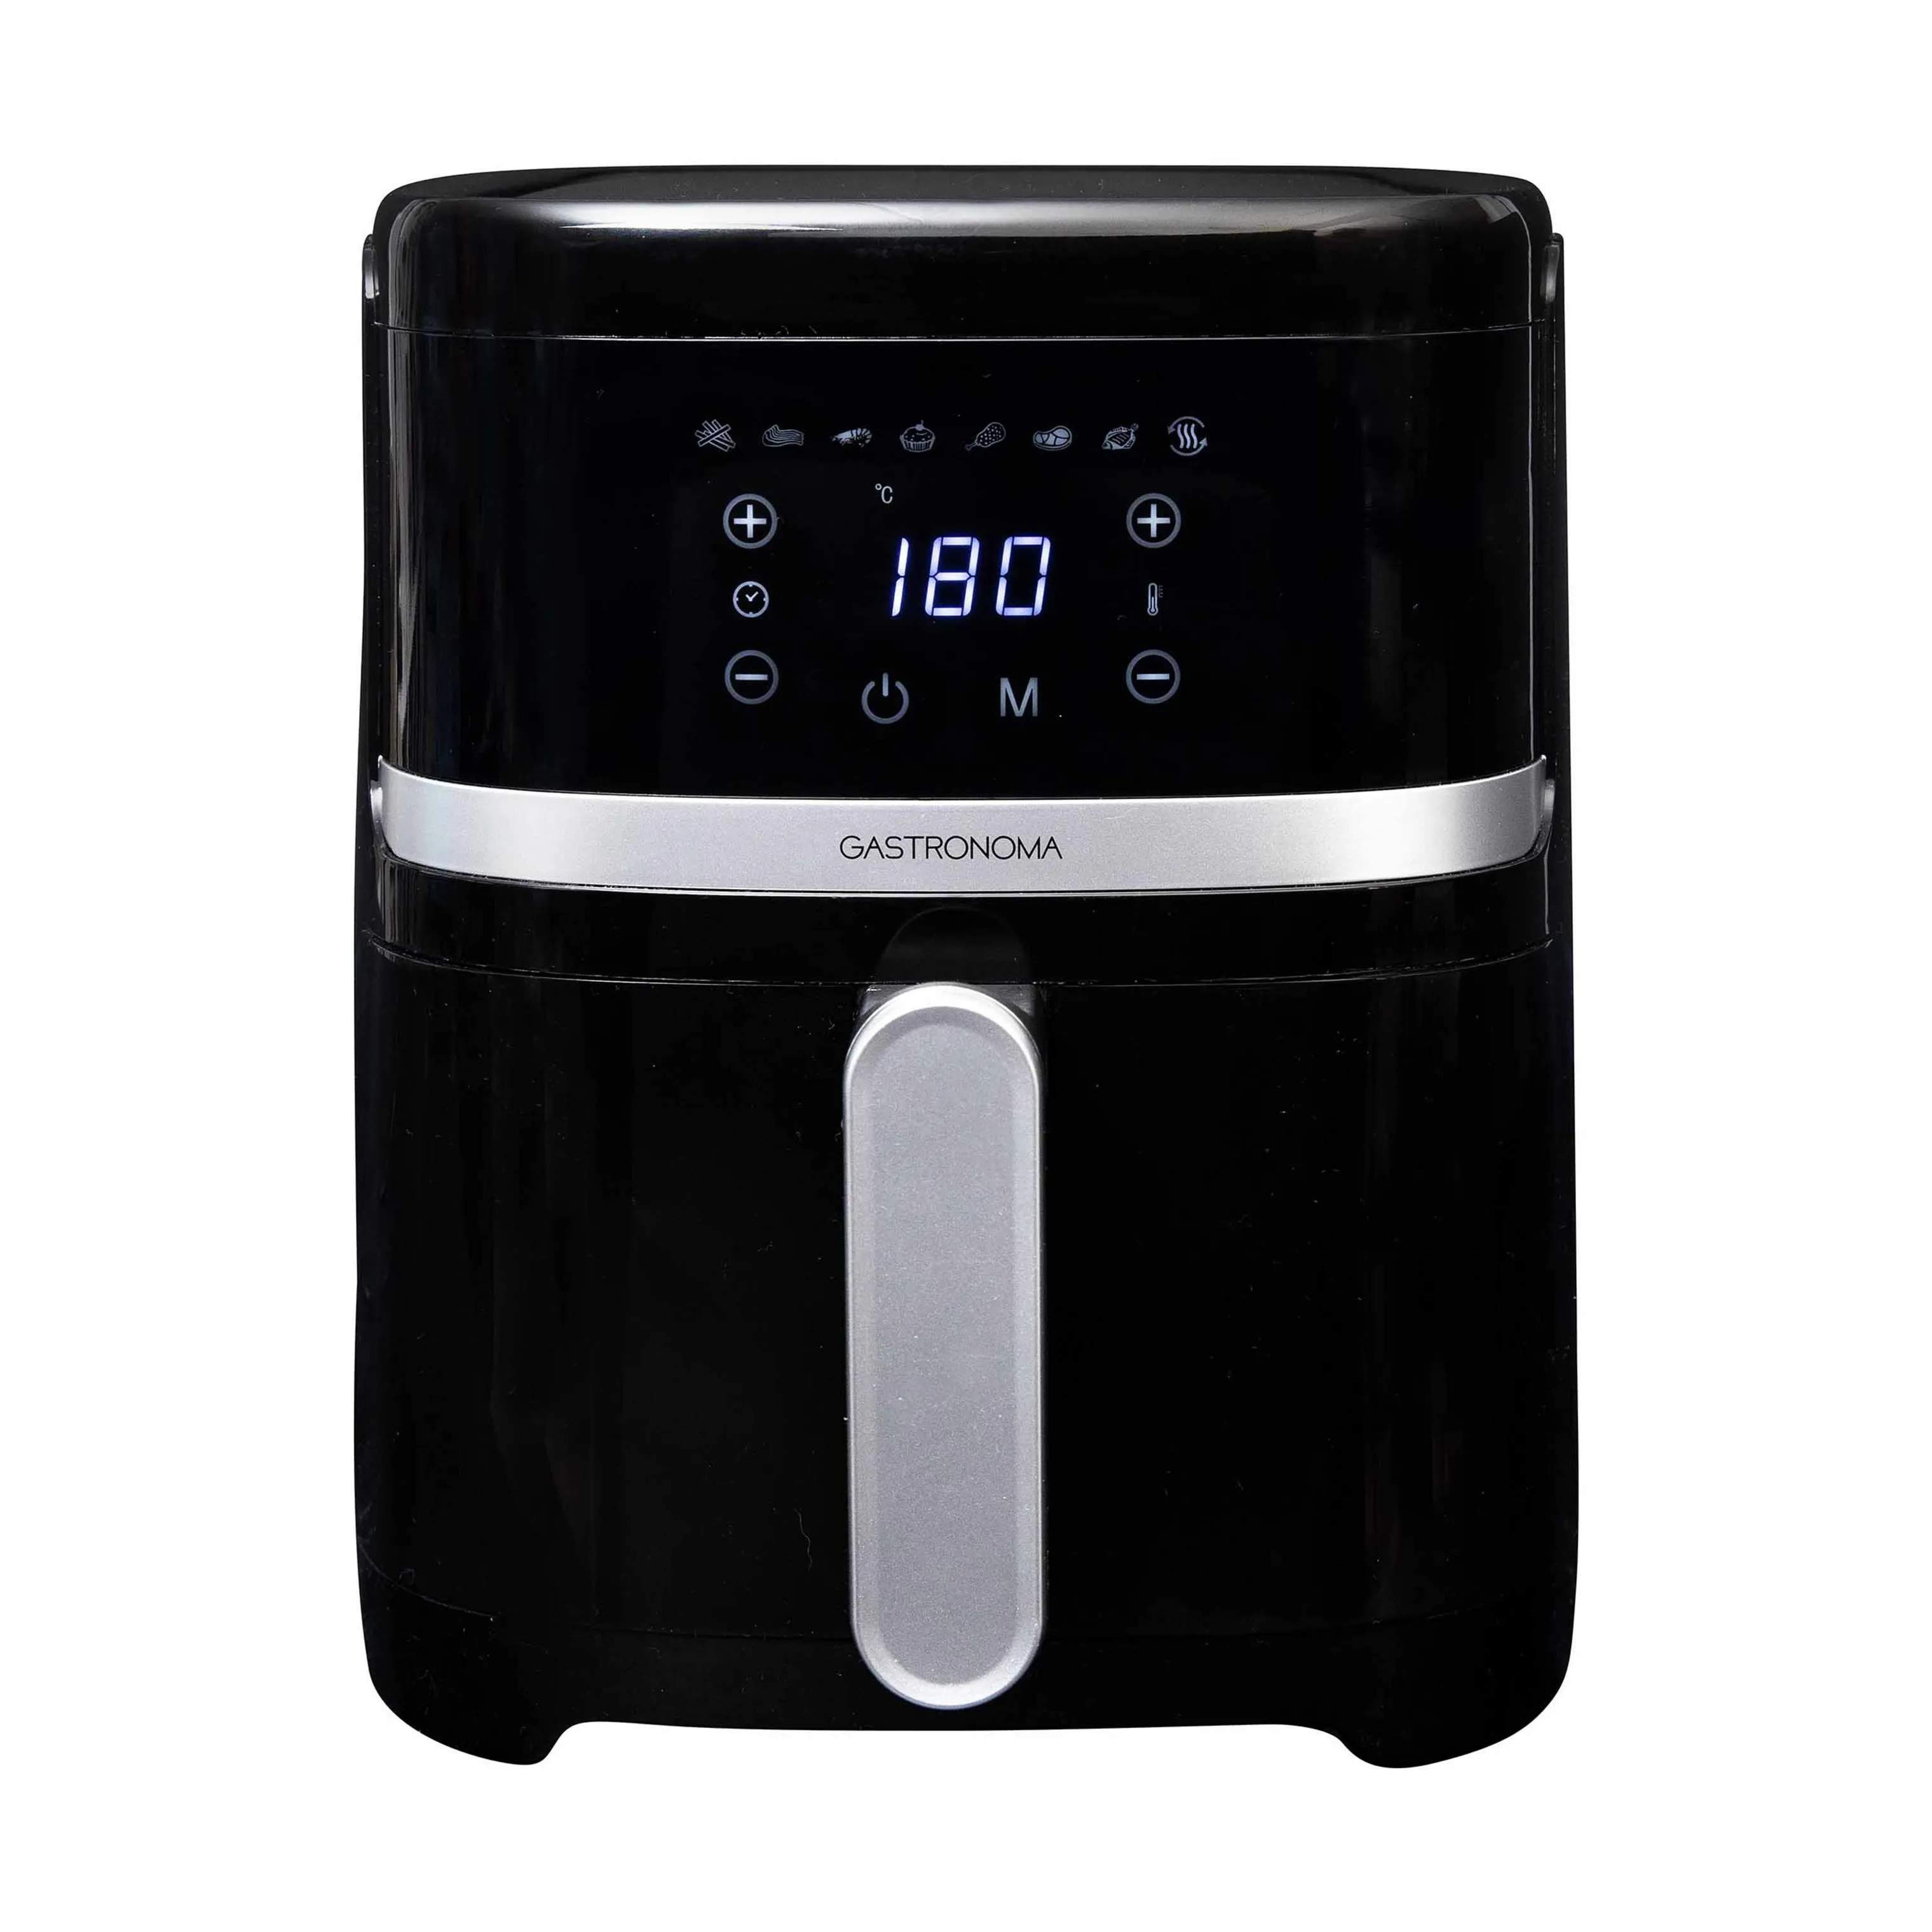 Low Fat Airfryer, sort, large